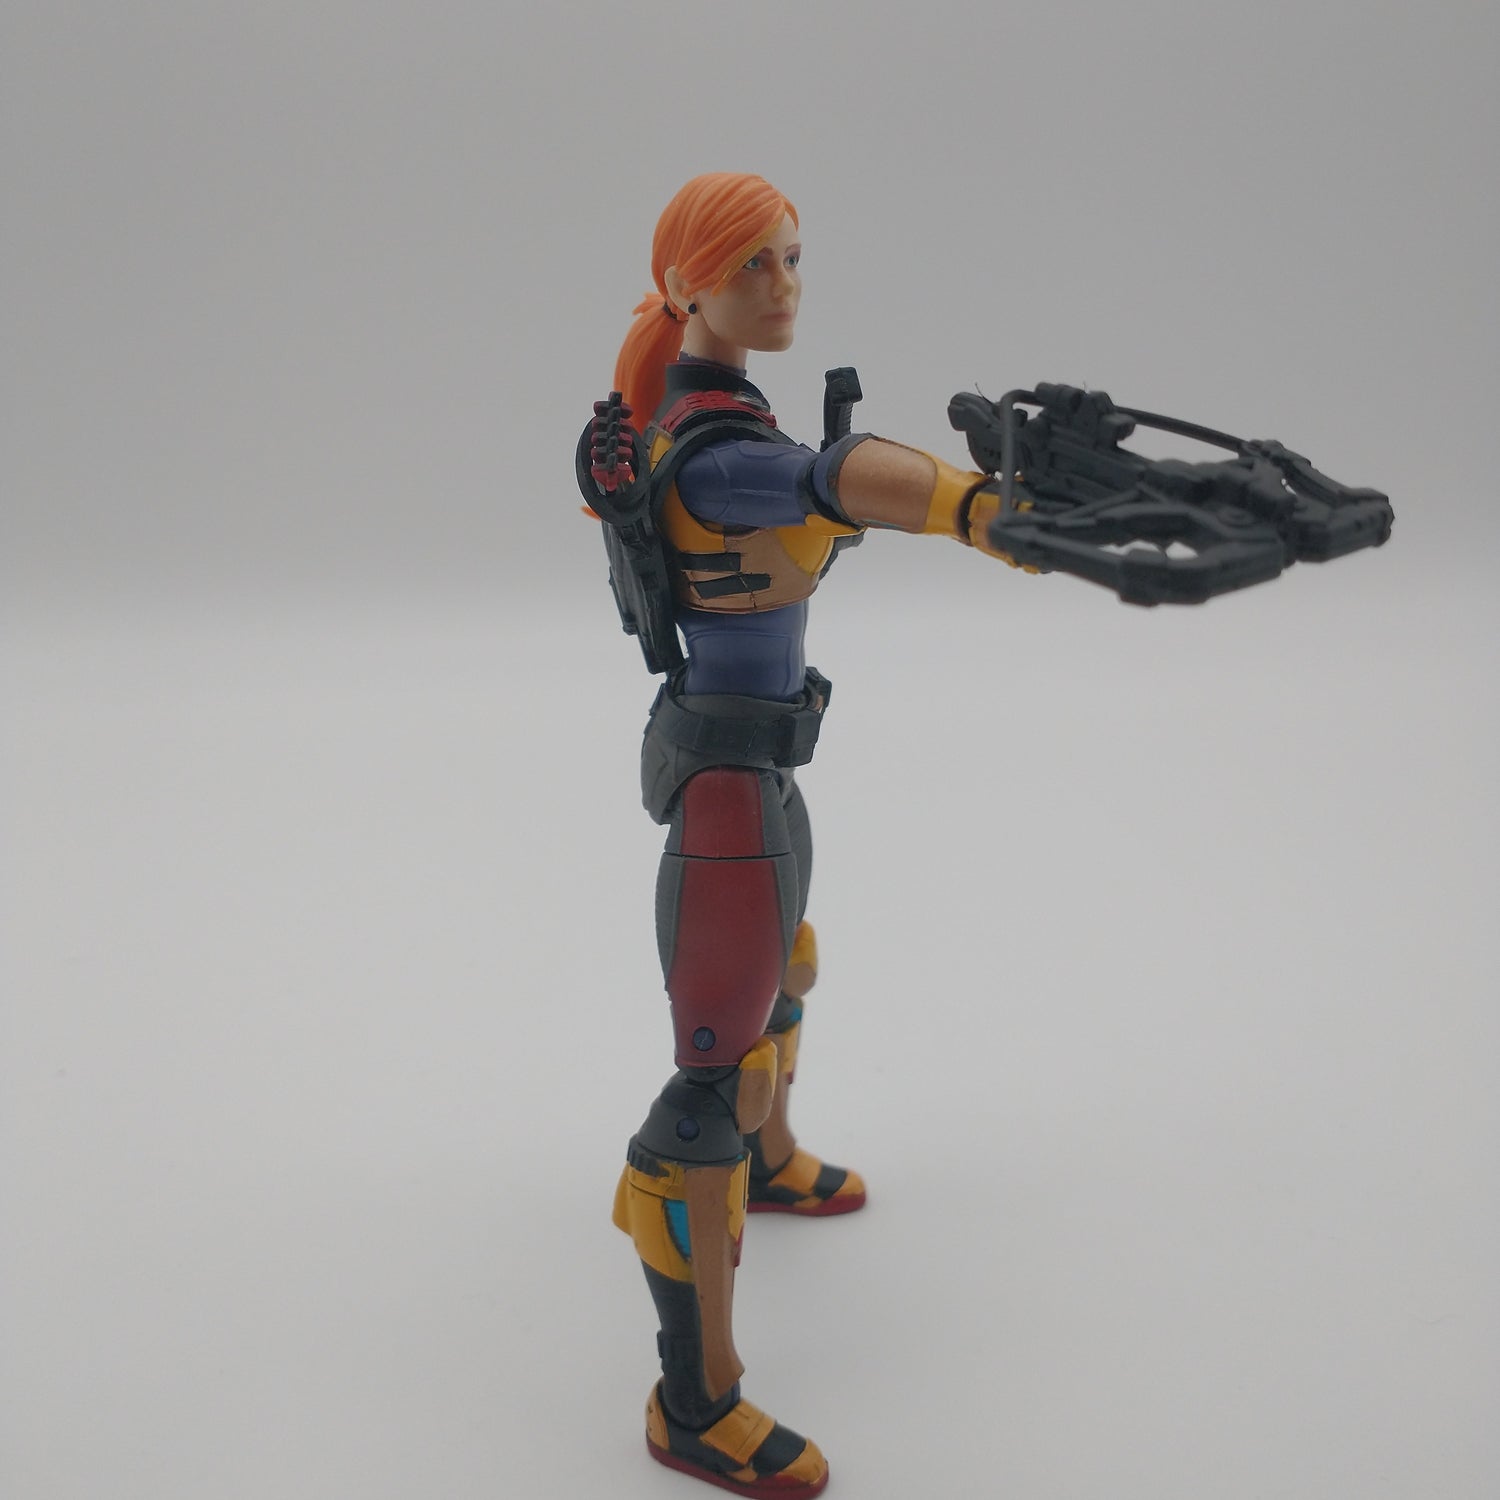  The action figure from the right side